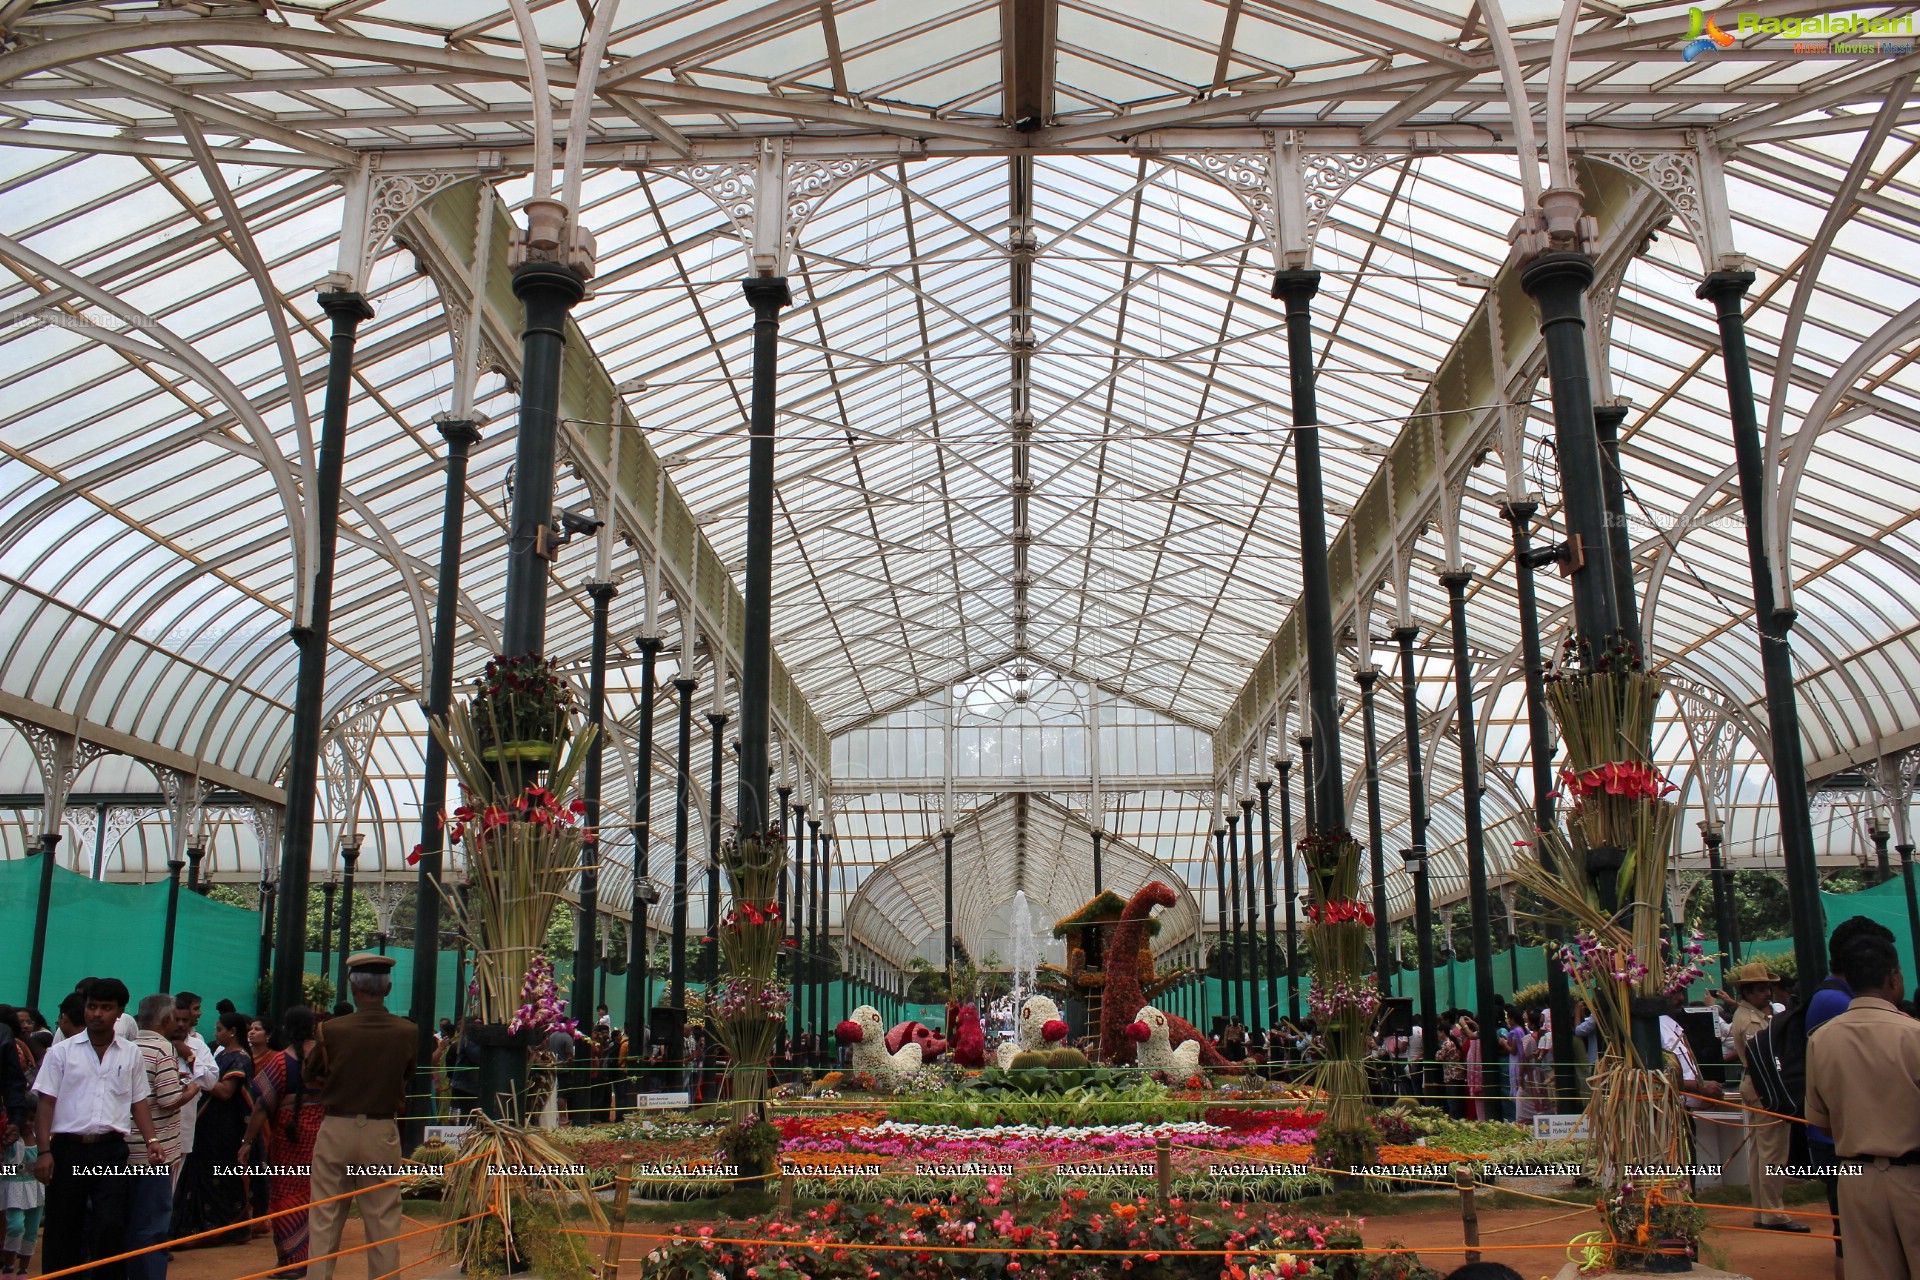 Lal Bagh Independence Day Flower Show (2012)